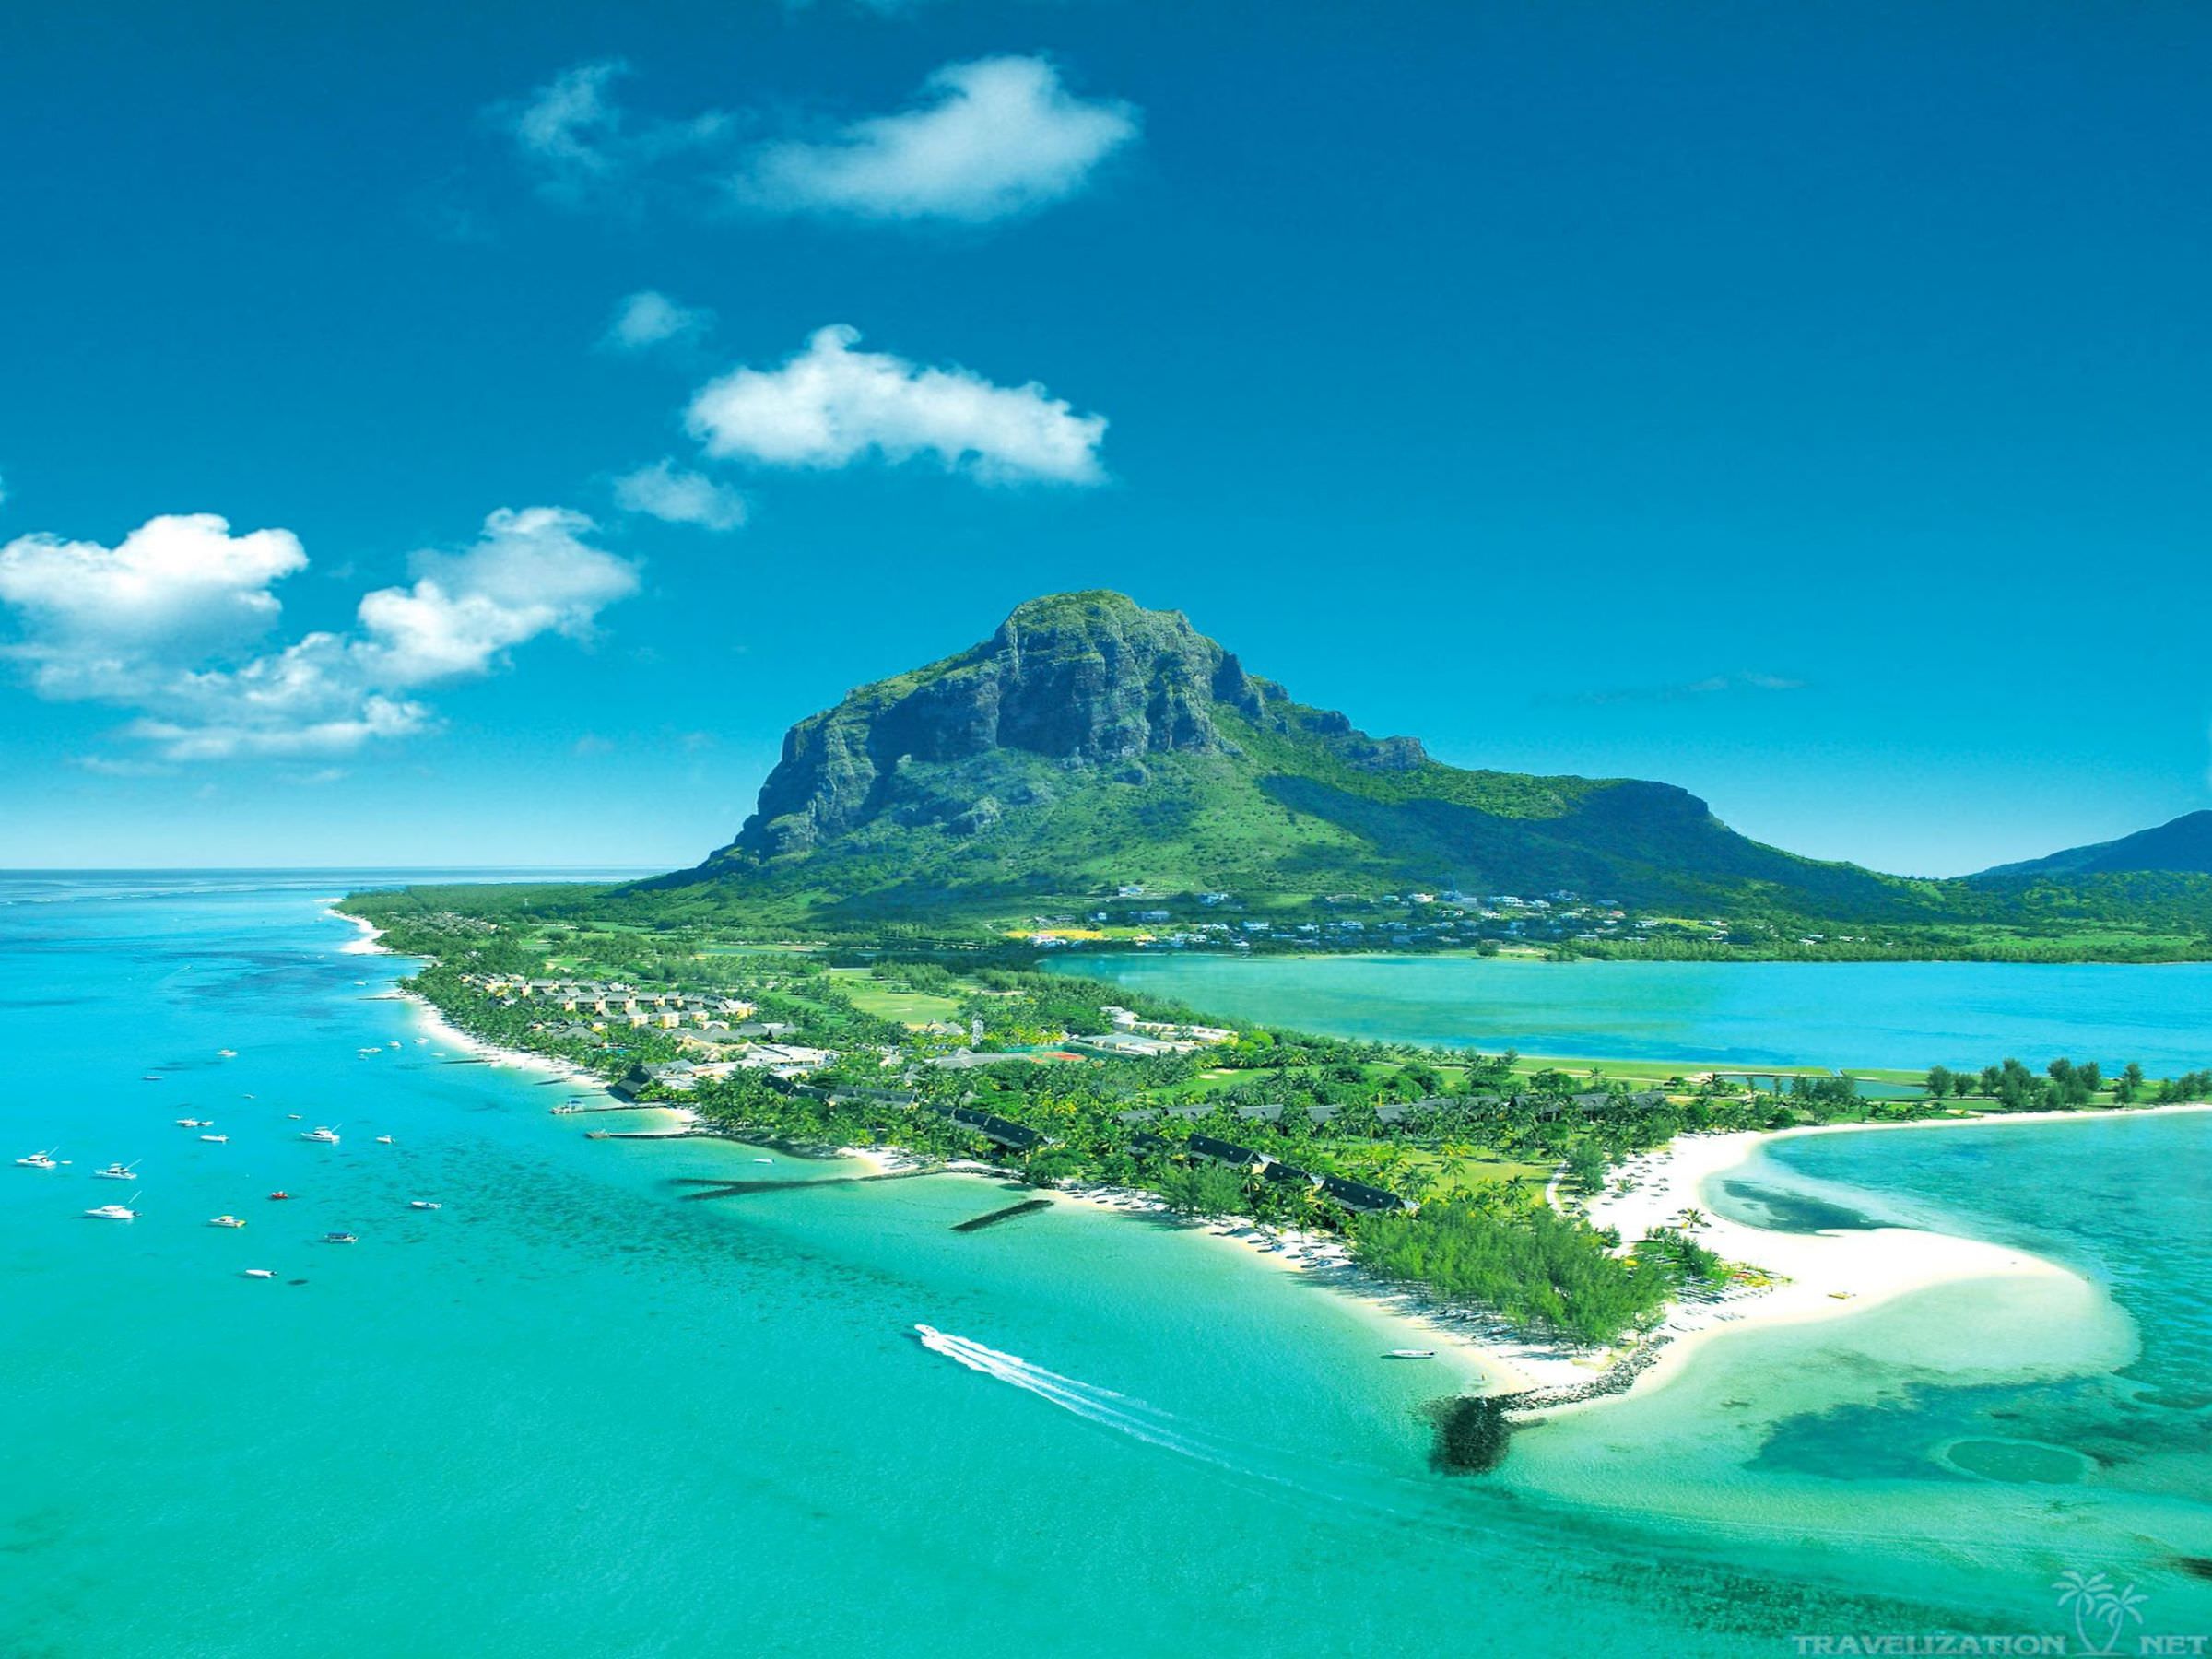 An Impeccable 6D/7N Mauritius Honeymoon Package from India